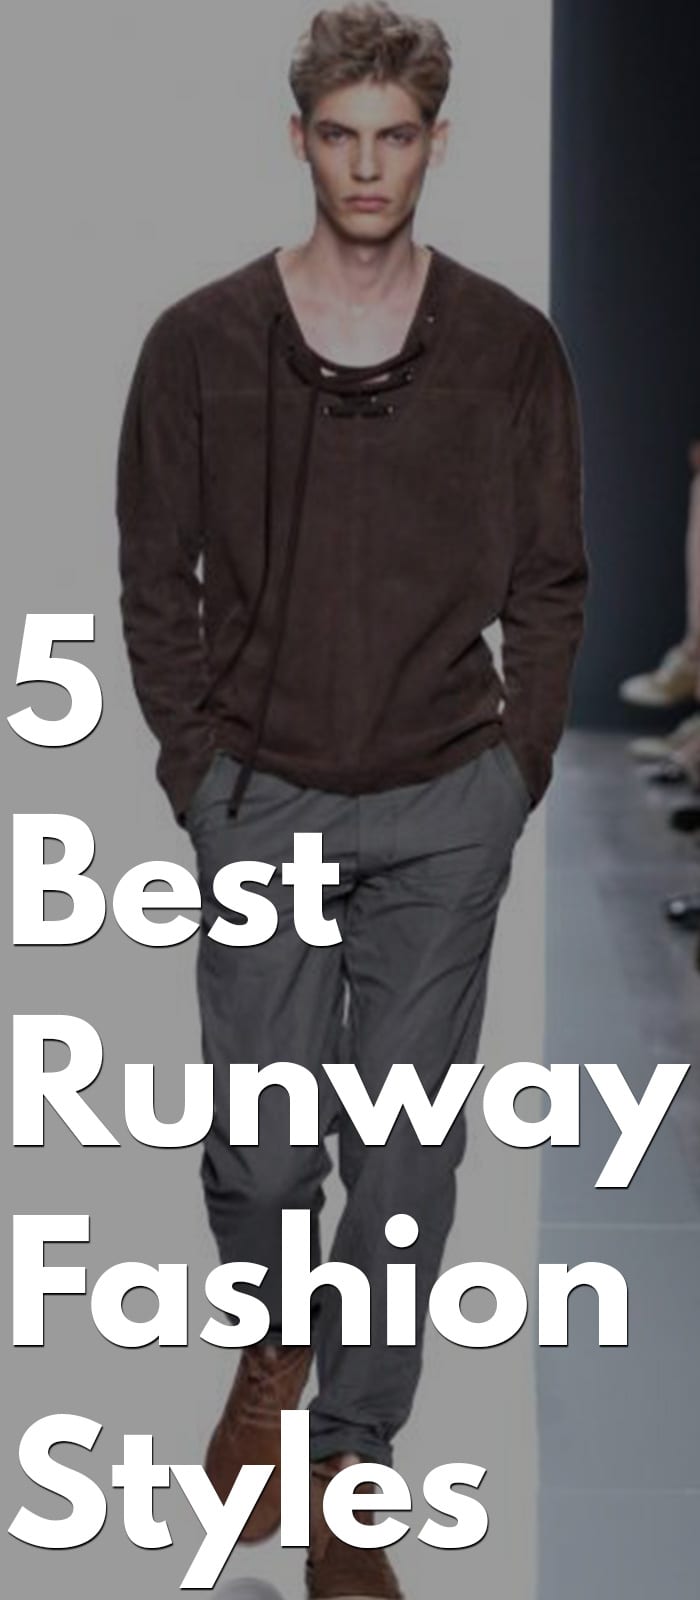 Best Runway Fashion- T-shirt, Chino, Sneakers, Trouser,Boots, Etc